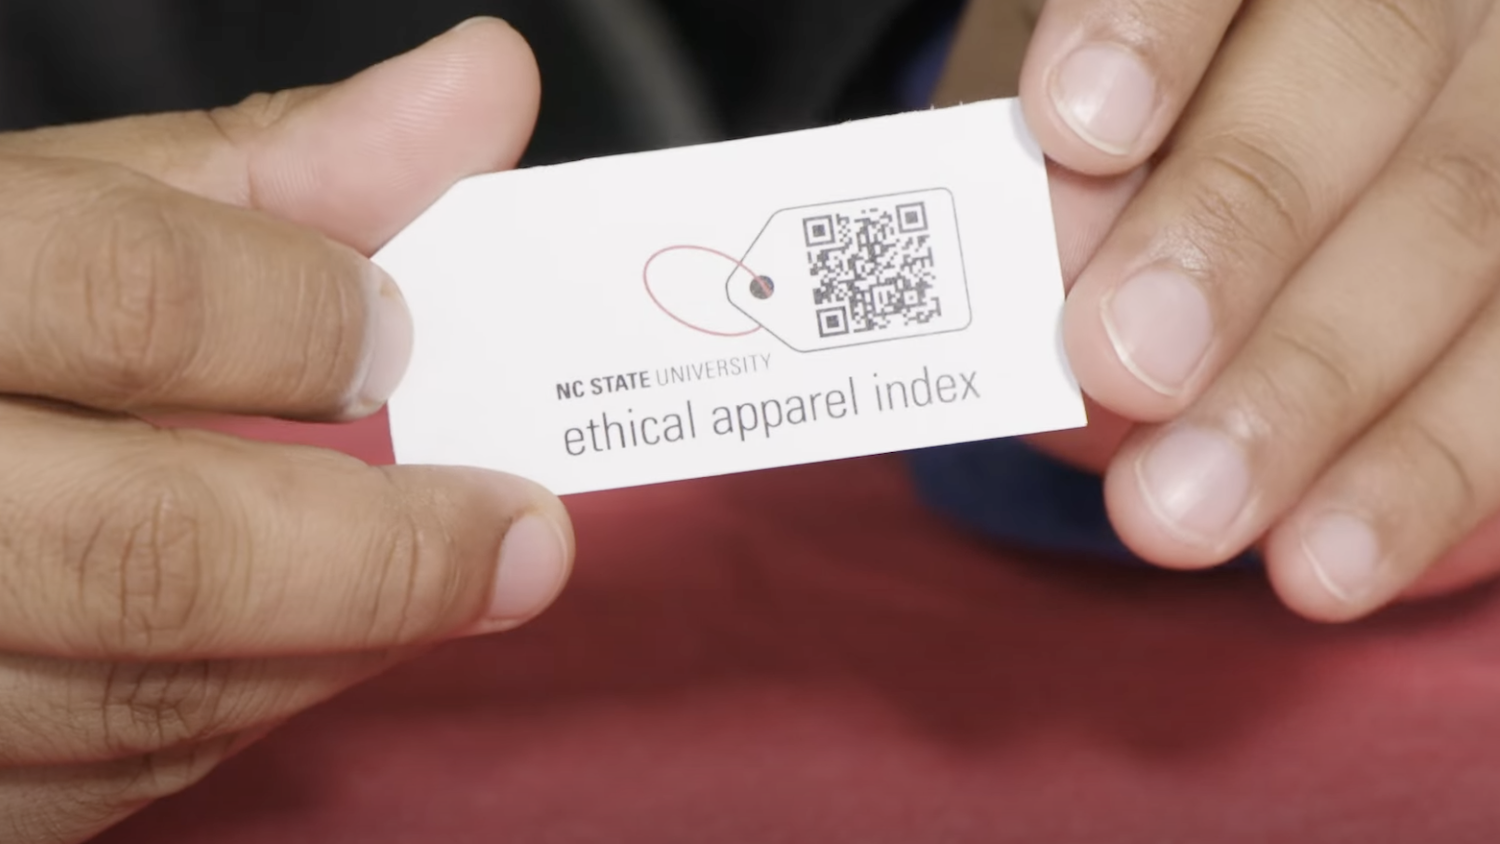 NC State Ethical Apparel Index